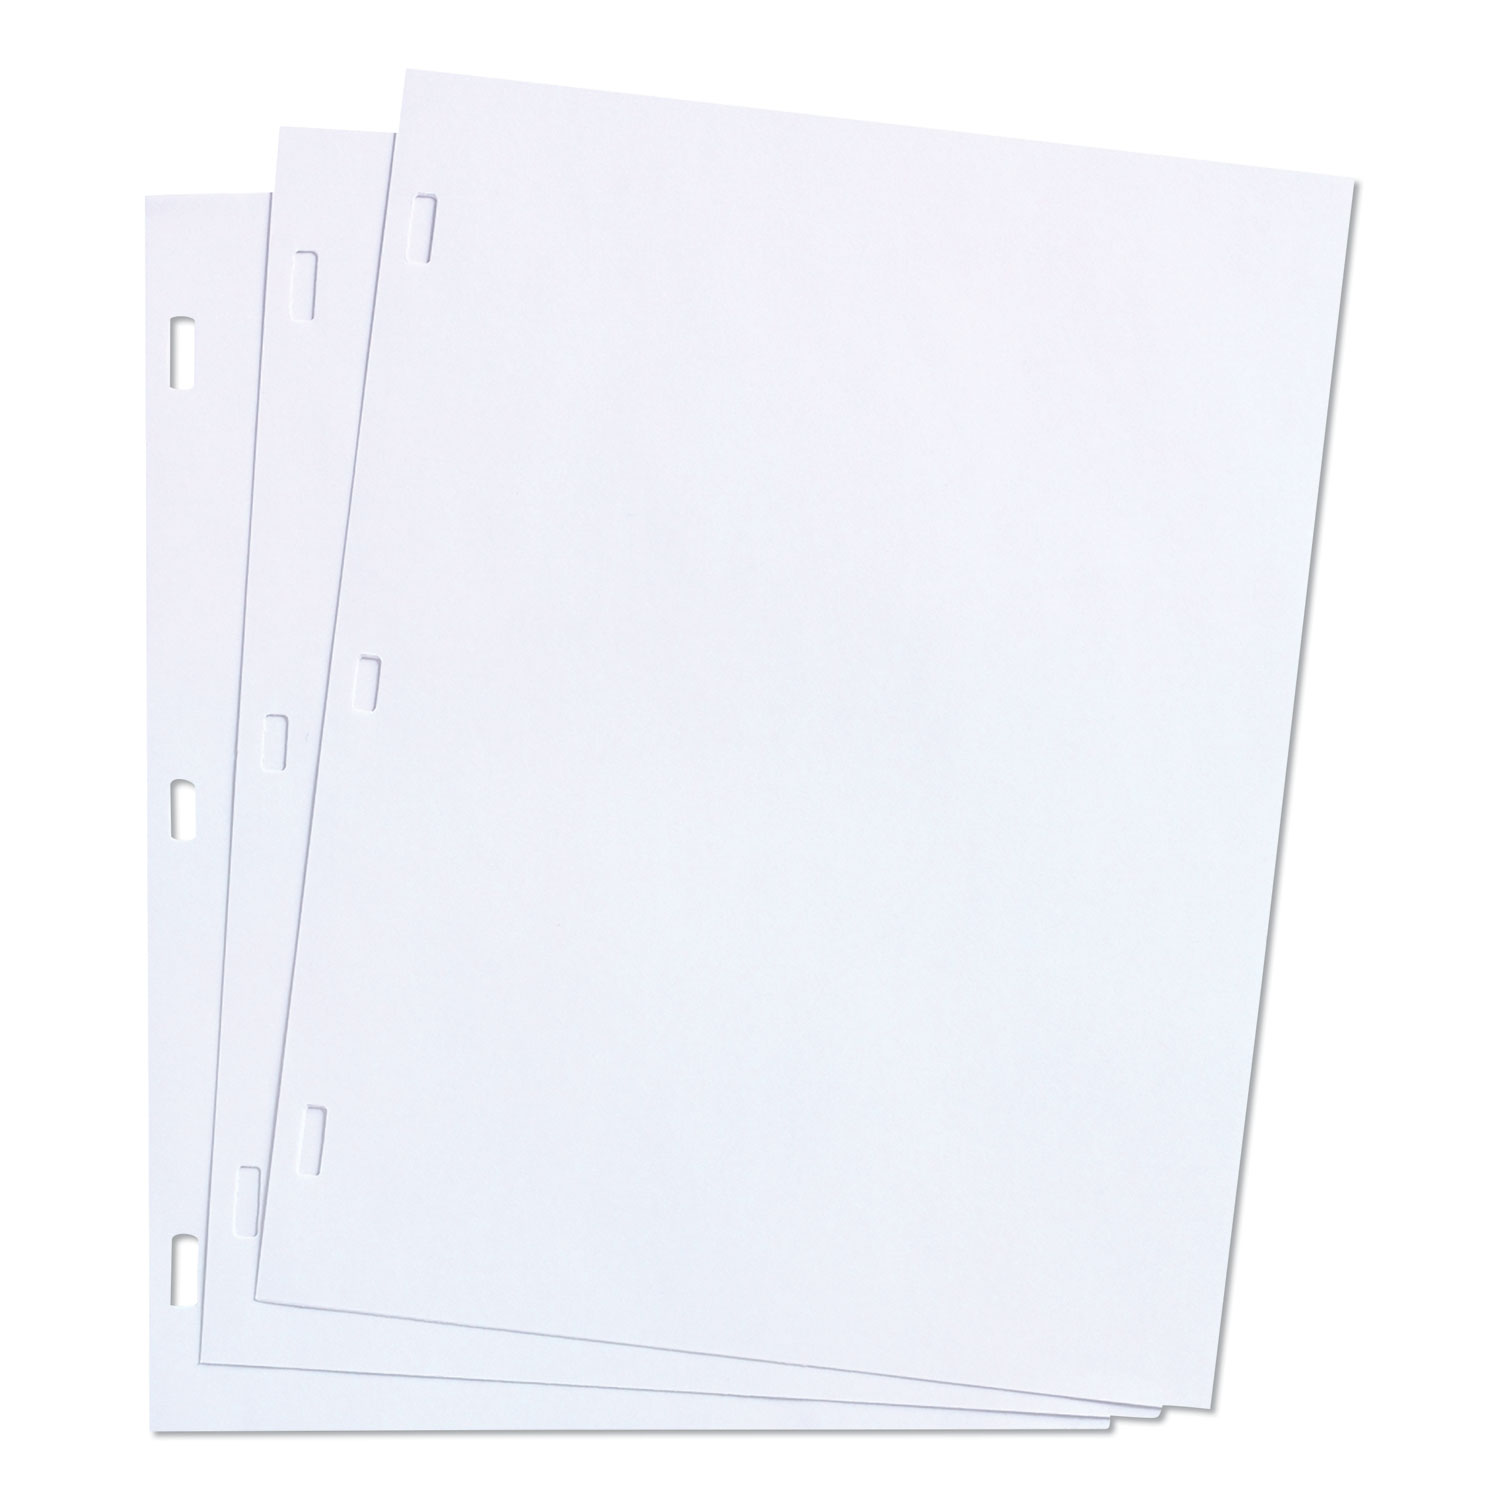 Archival Paper Watermarked 32lb Minute Paper - 11 X 8-1/2 - 100% Cotton,  Acid-Free, Blank Sheets for Minute Books or Ledgers- (500 Round Holes)